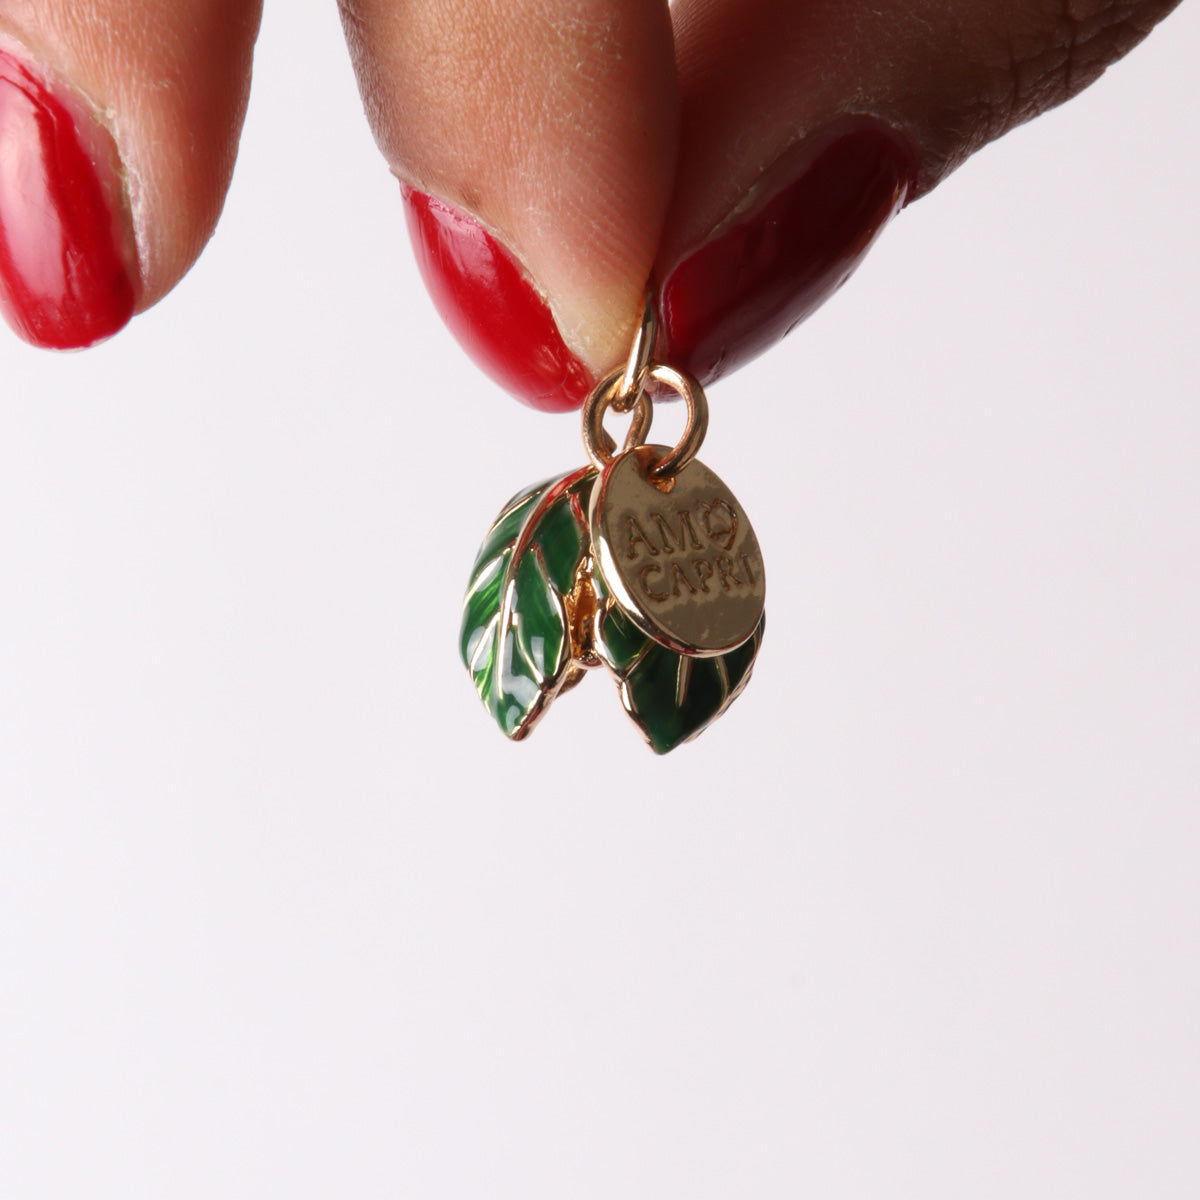 Metal pendant bell in the shape of leaves embellished with colored glazes